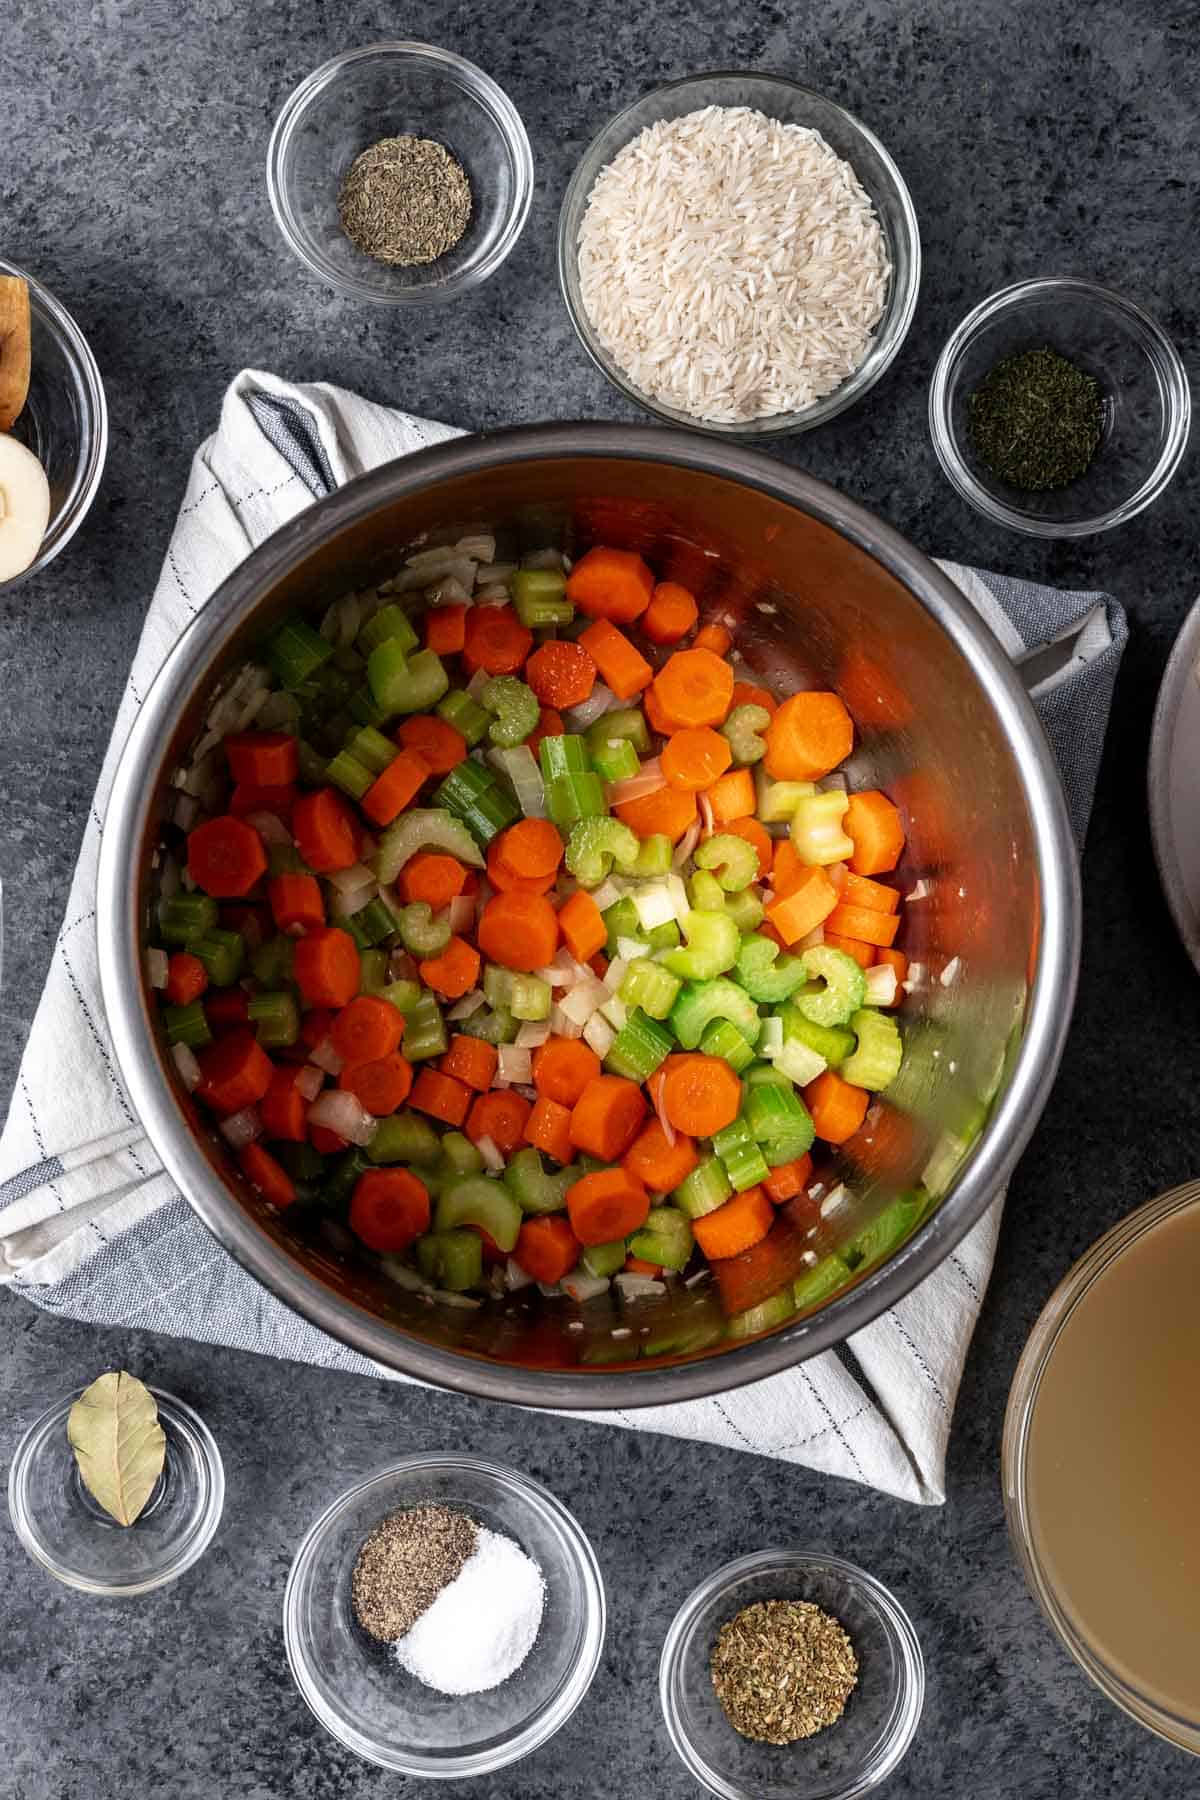 Onion, carrot, celery, and garlic cooking in an instant pot.